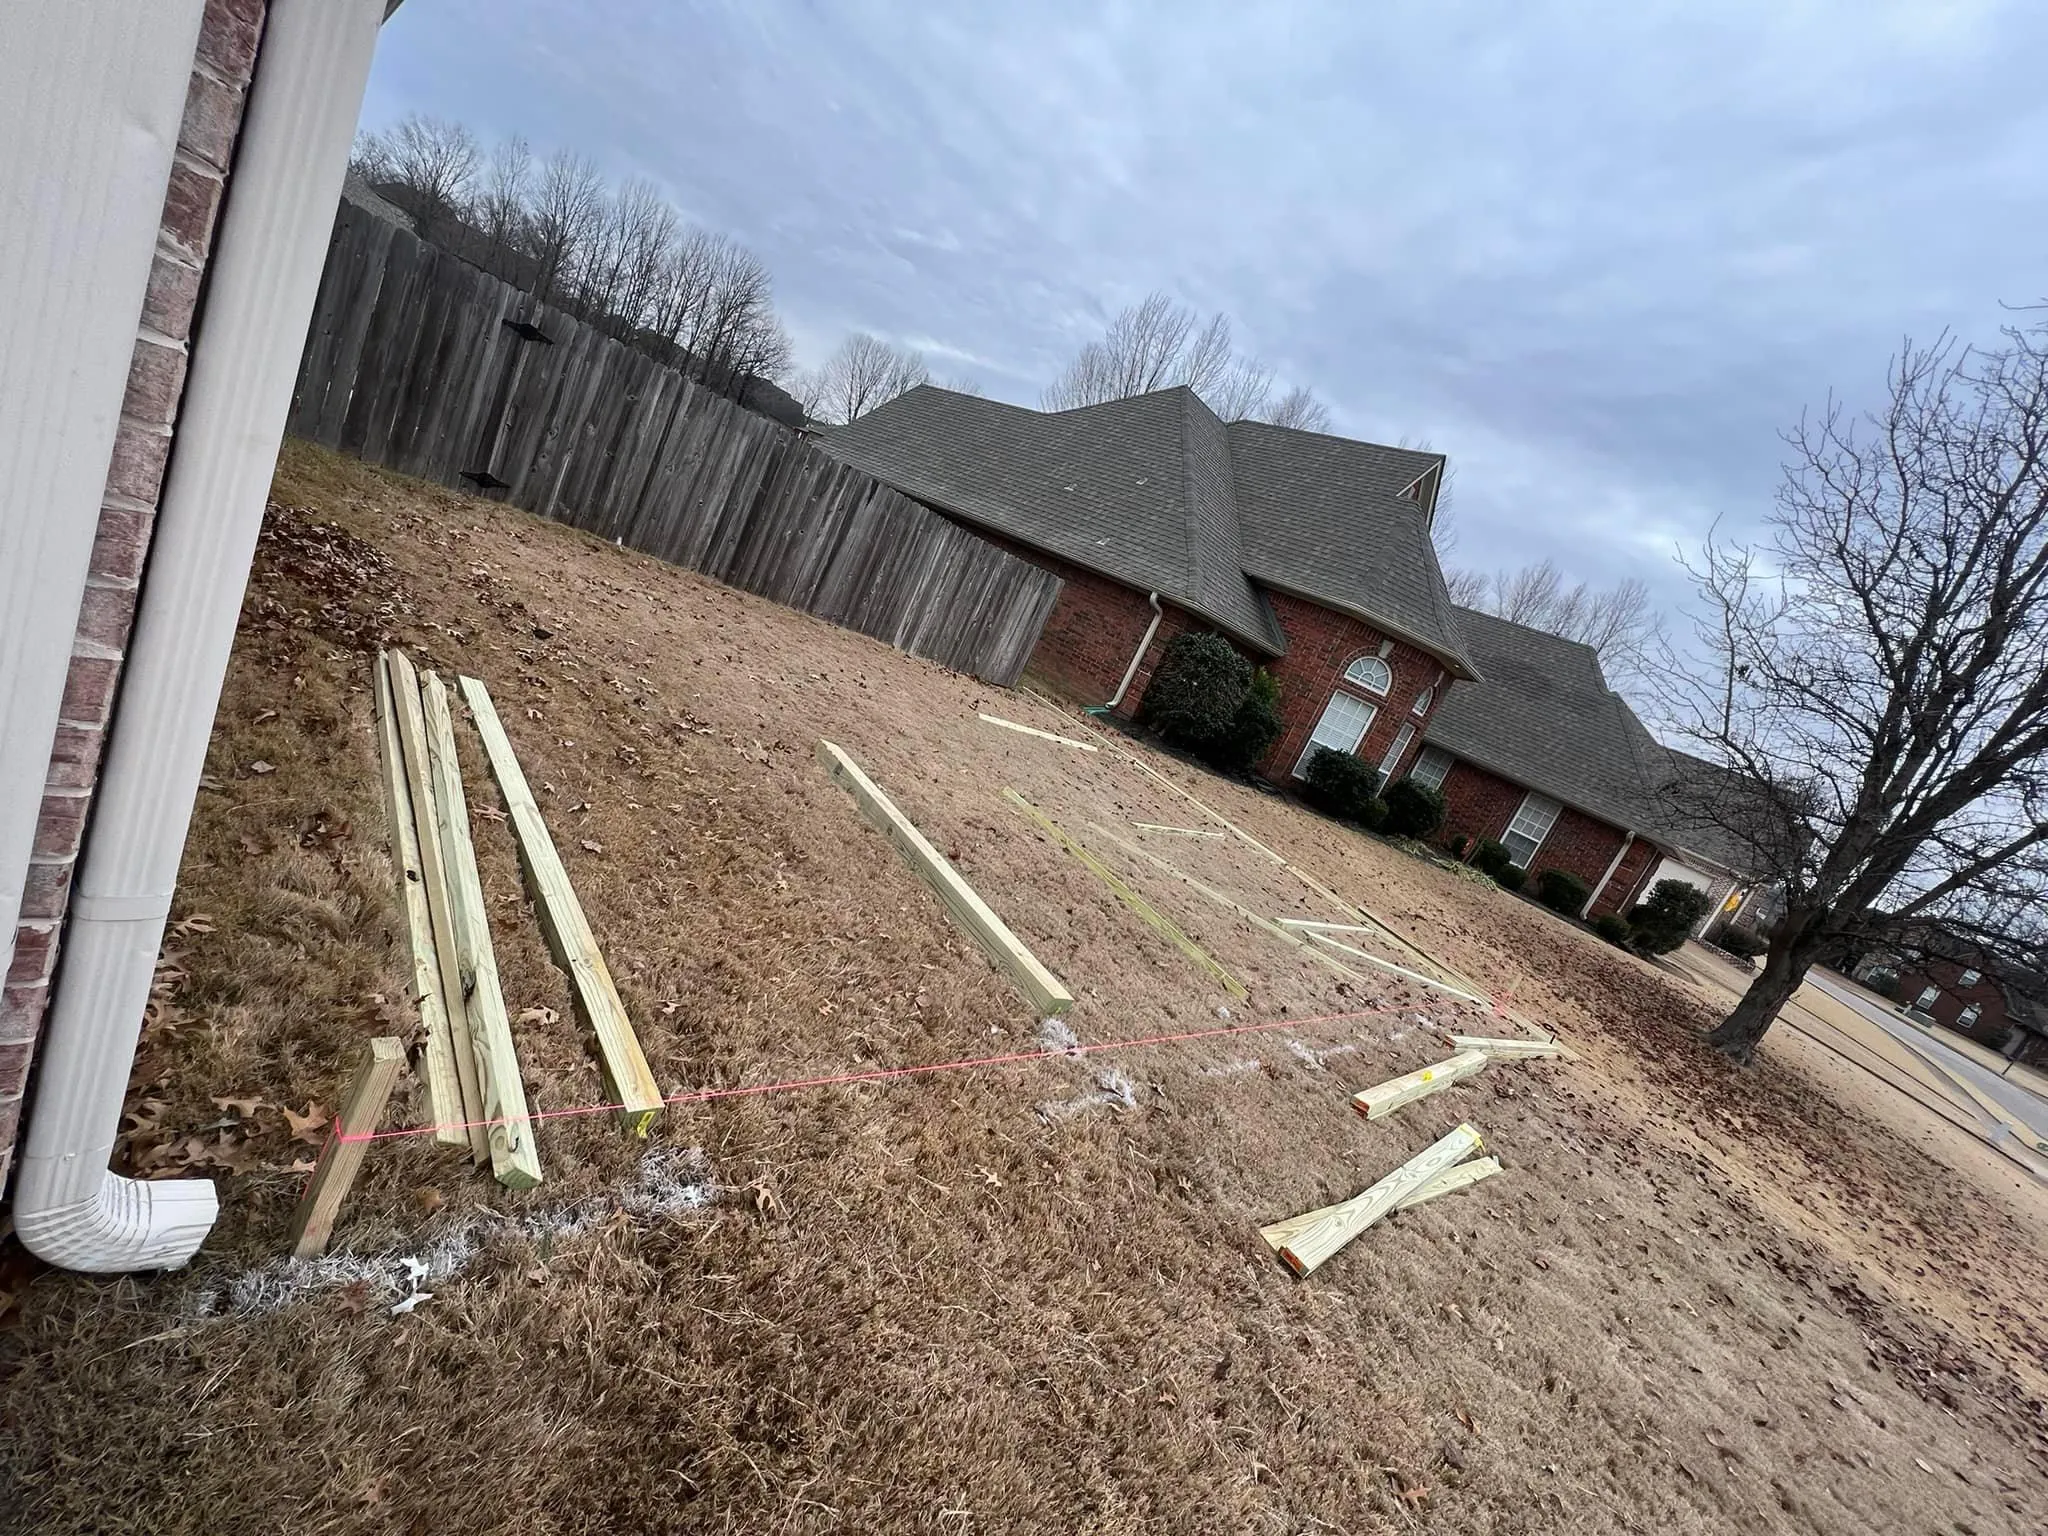 Fence Installation for Champion Land & Fence LLC in Memphis, TN